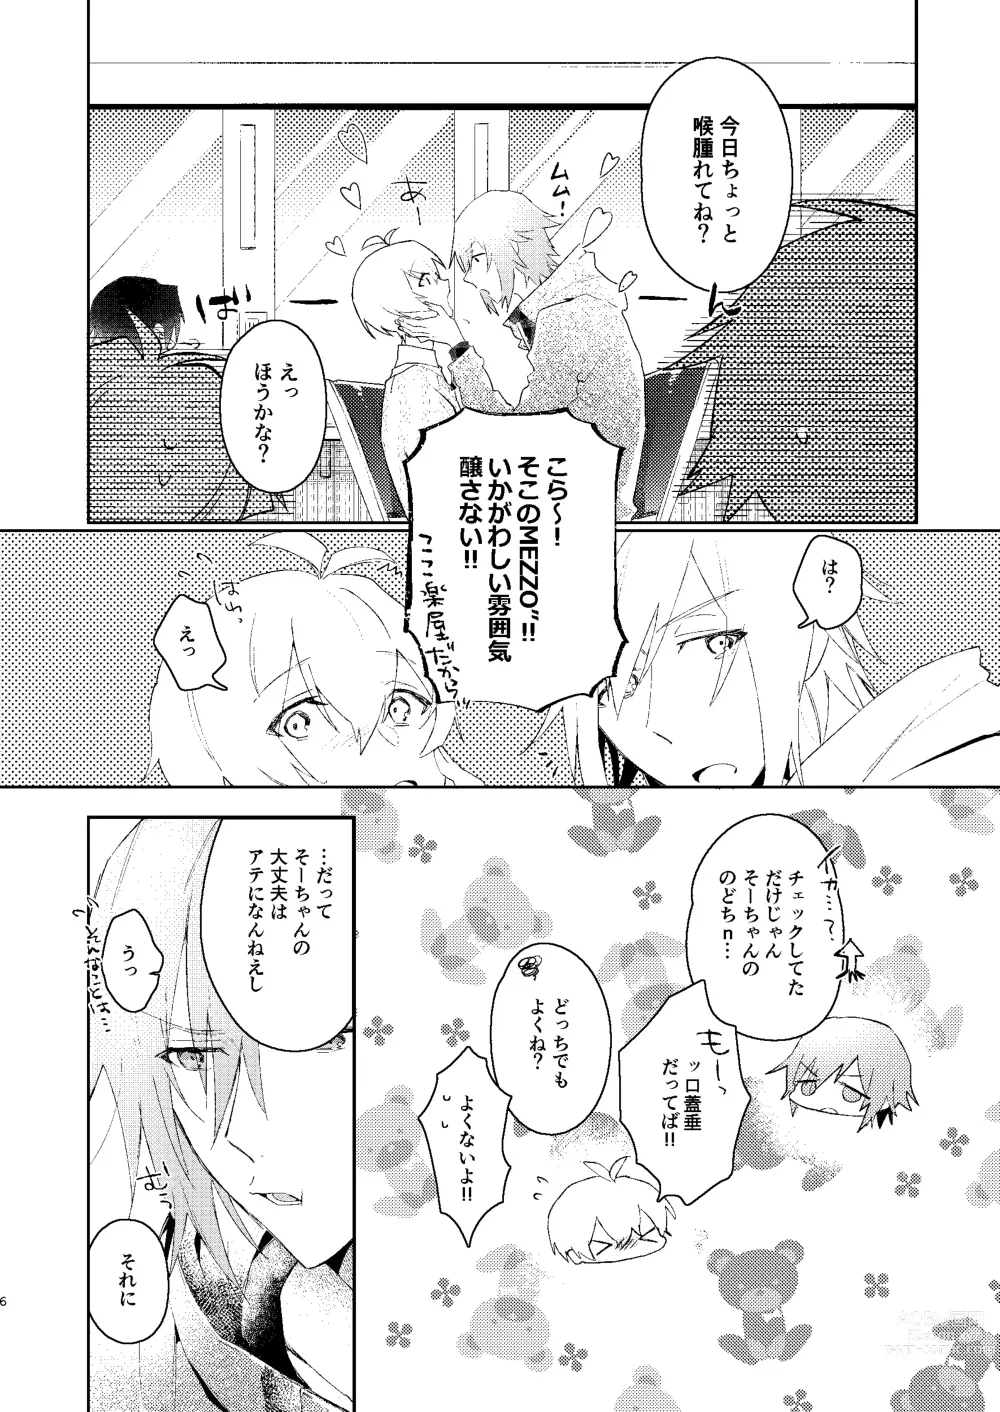 Page 5 of doujinshi Love you in a Dream